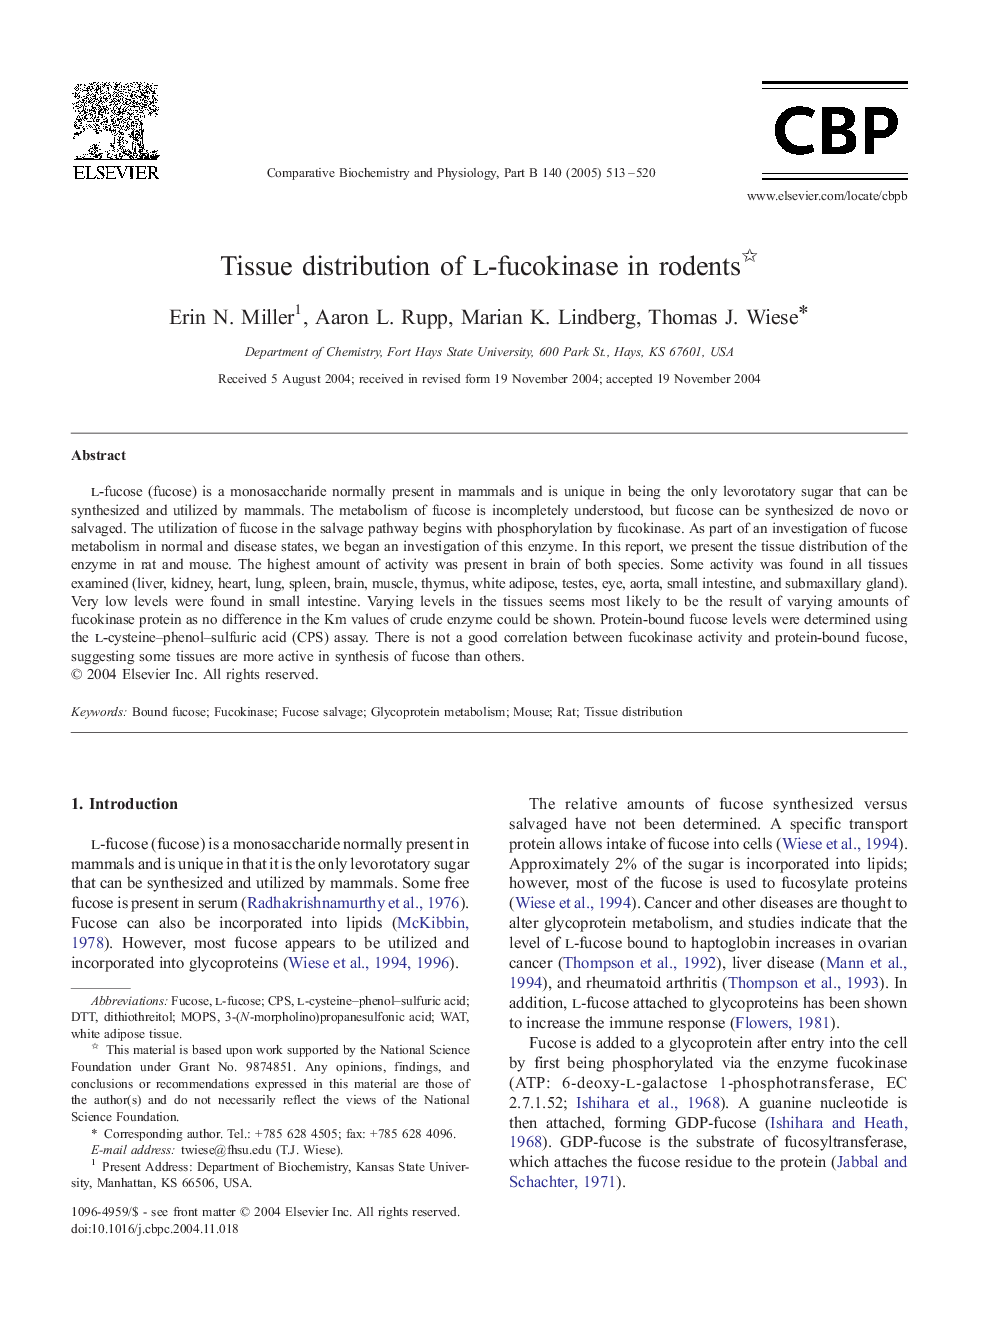 Tissue distribution of l-fucokinase in rodents